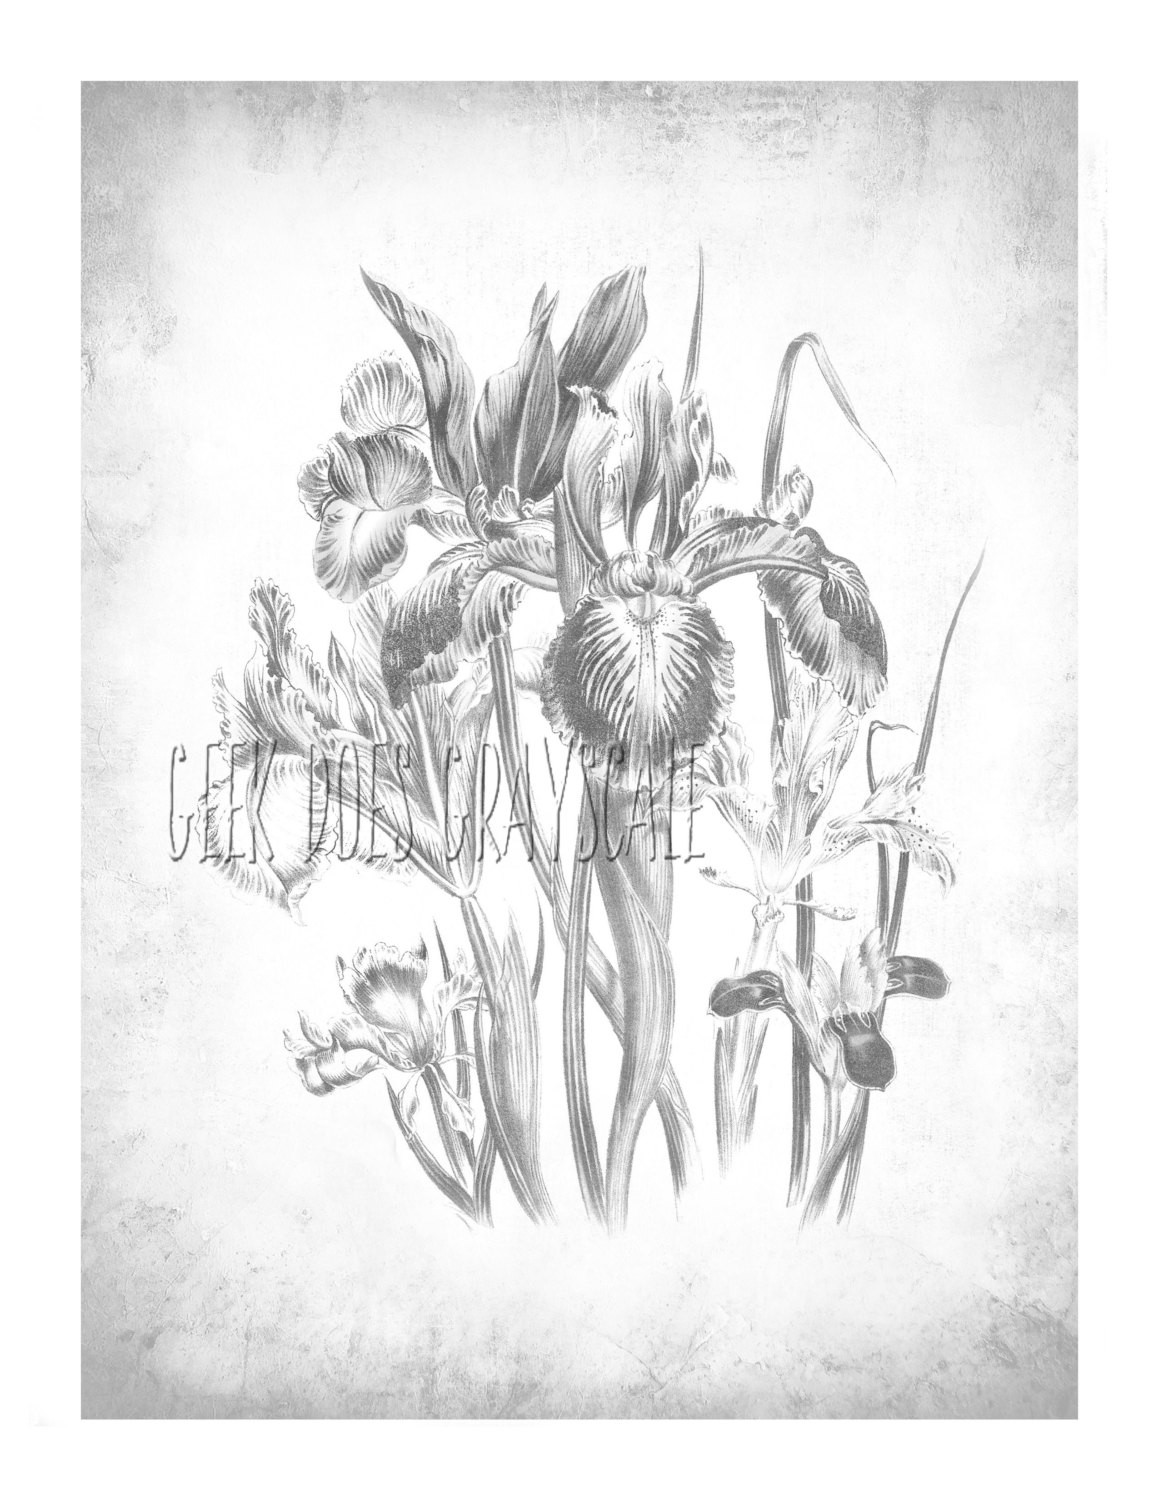 Free Printable Grayscale Coloring Pages
 Iris Printable Grayscale Grayscale flowers Adult coloring